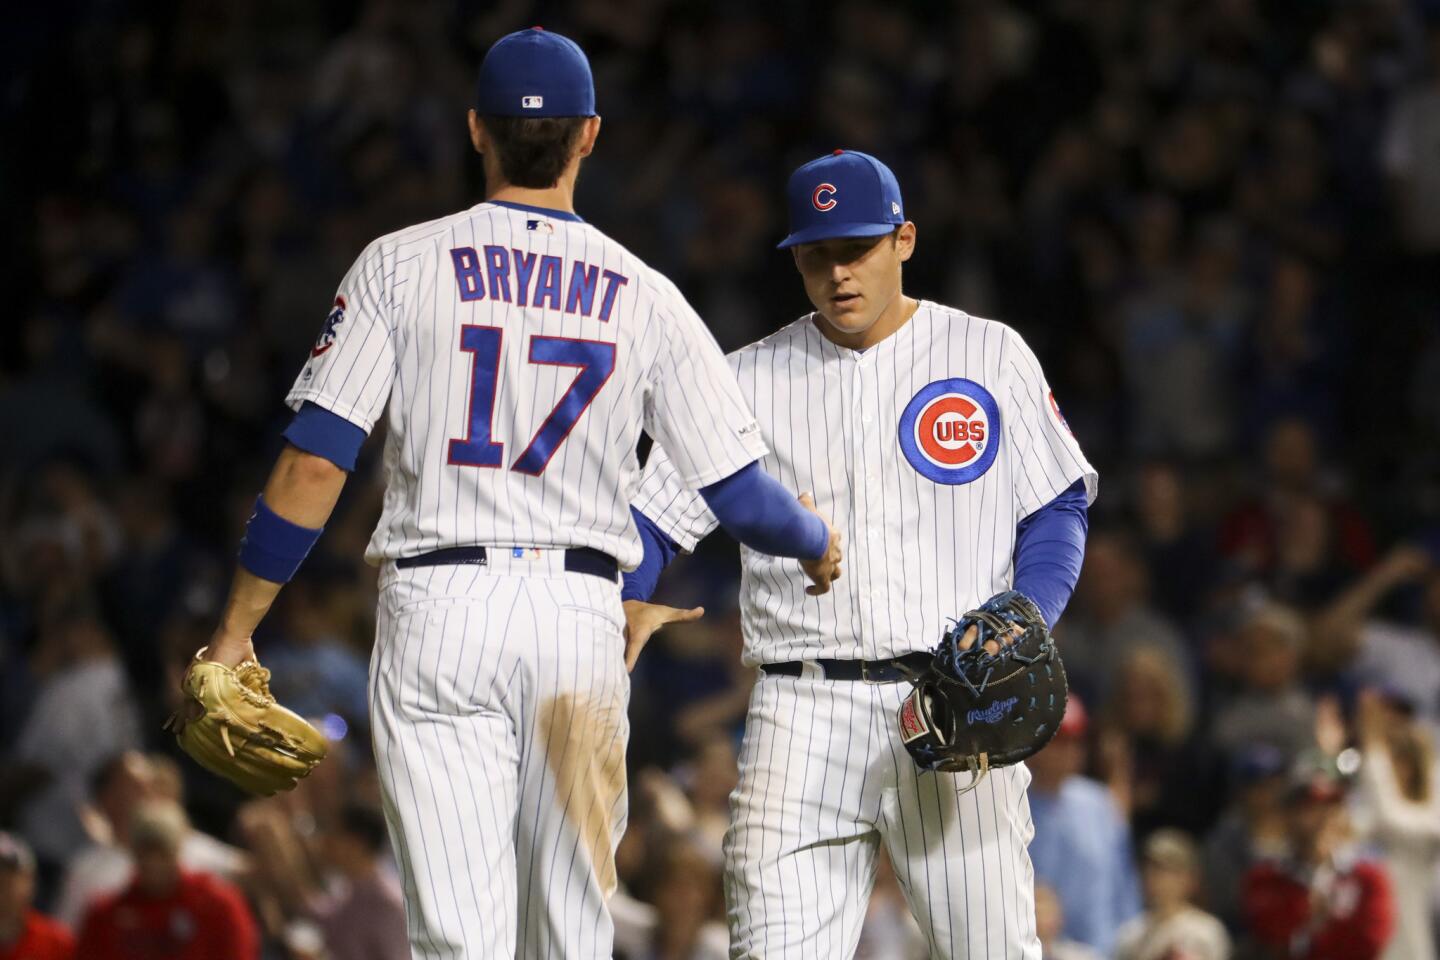 Cubs third baseman Kris Bryant celebrates with teammate Anthony Rizzo after the Cubs defeated the Cardinals, 13-5, on May 5, 2019, at Wrigley Field.